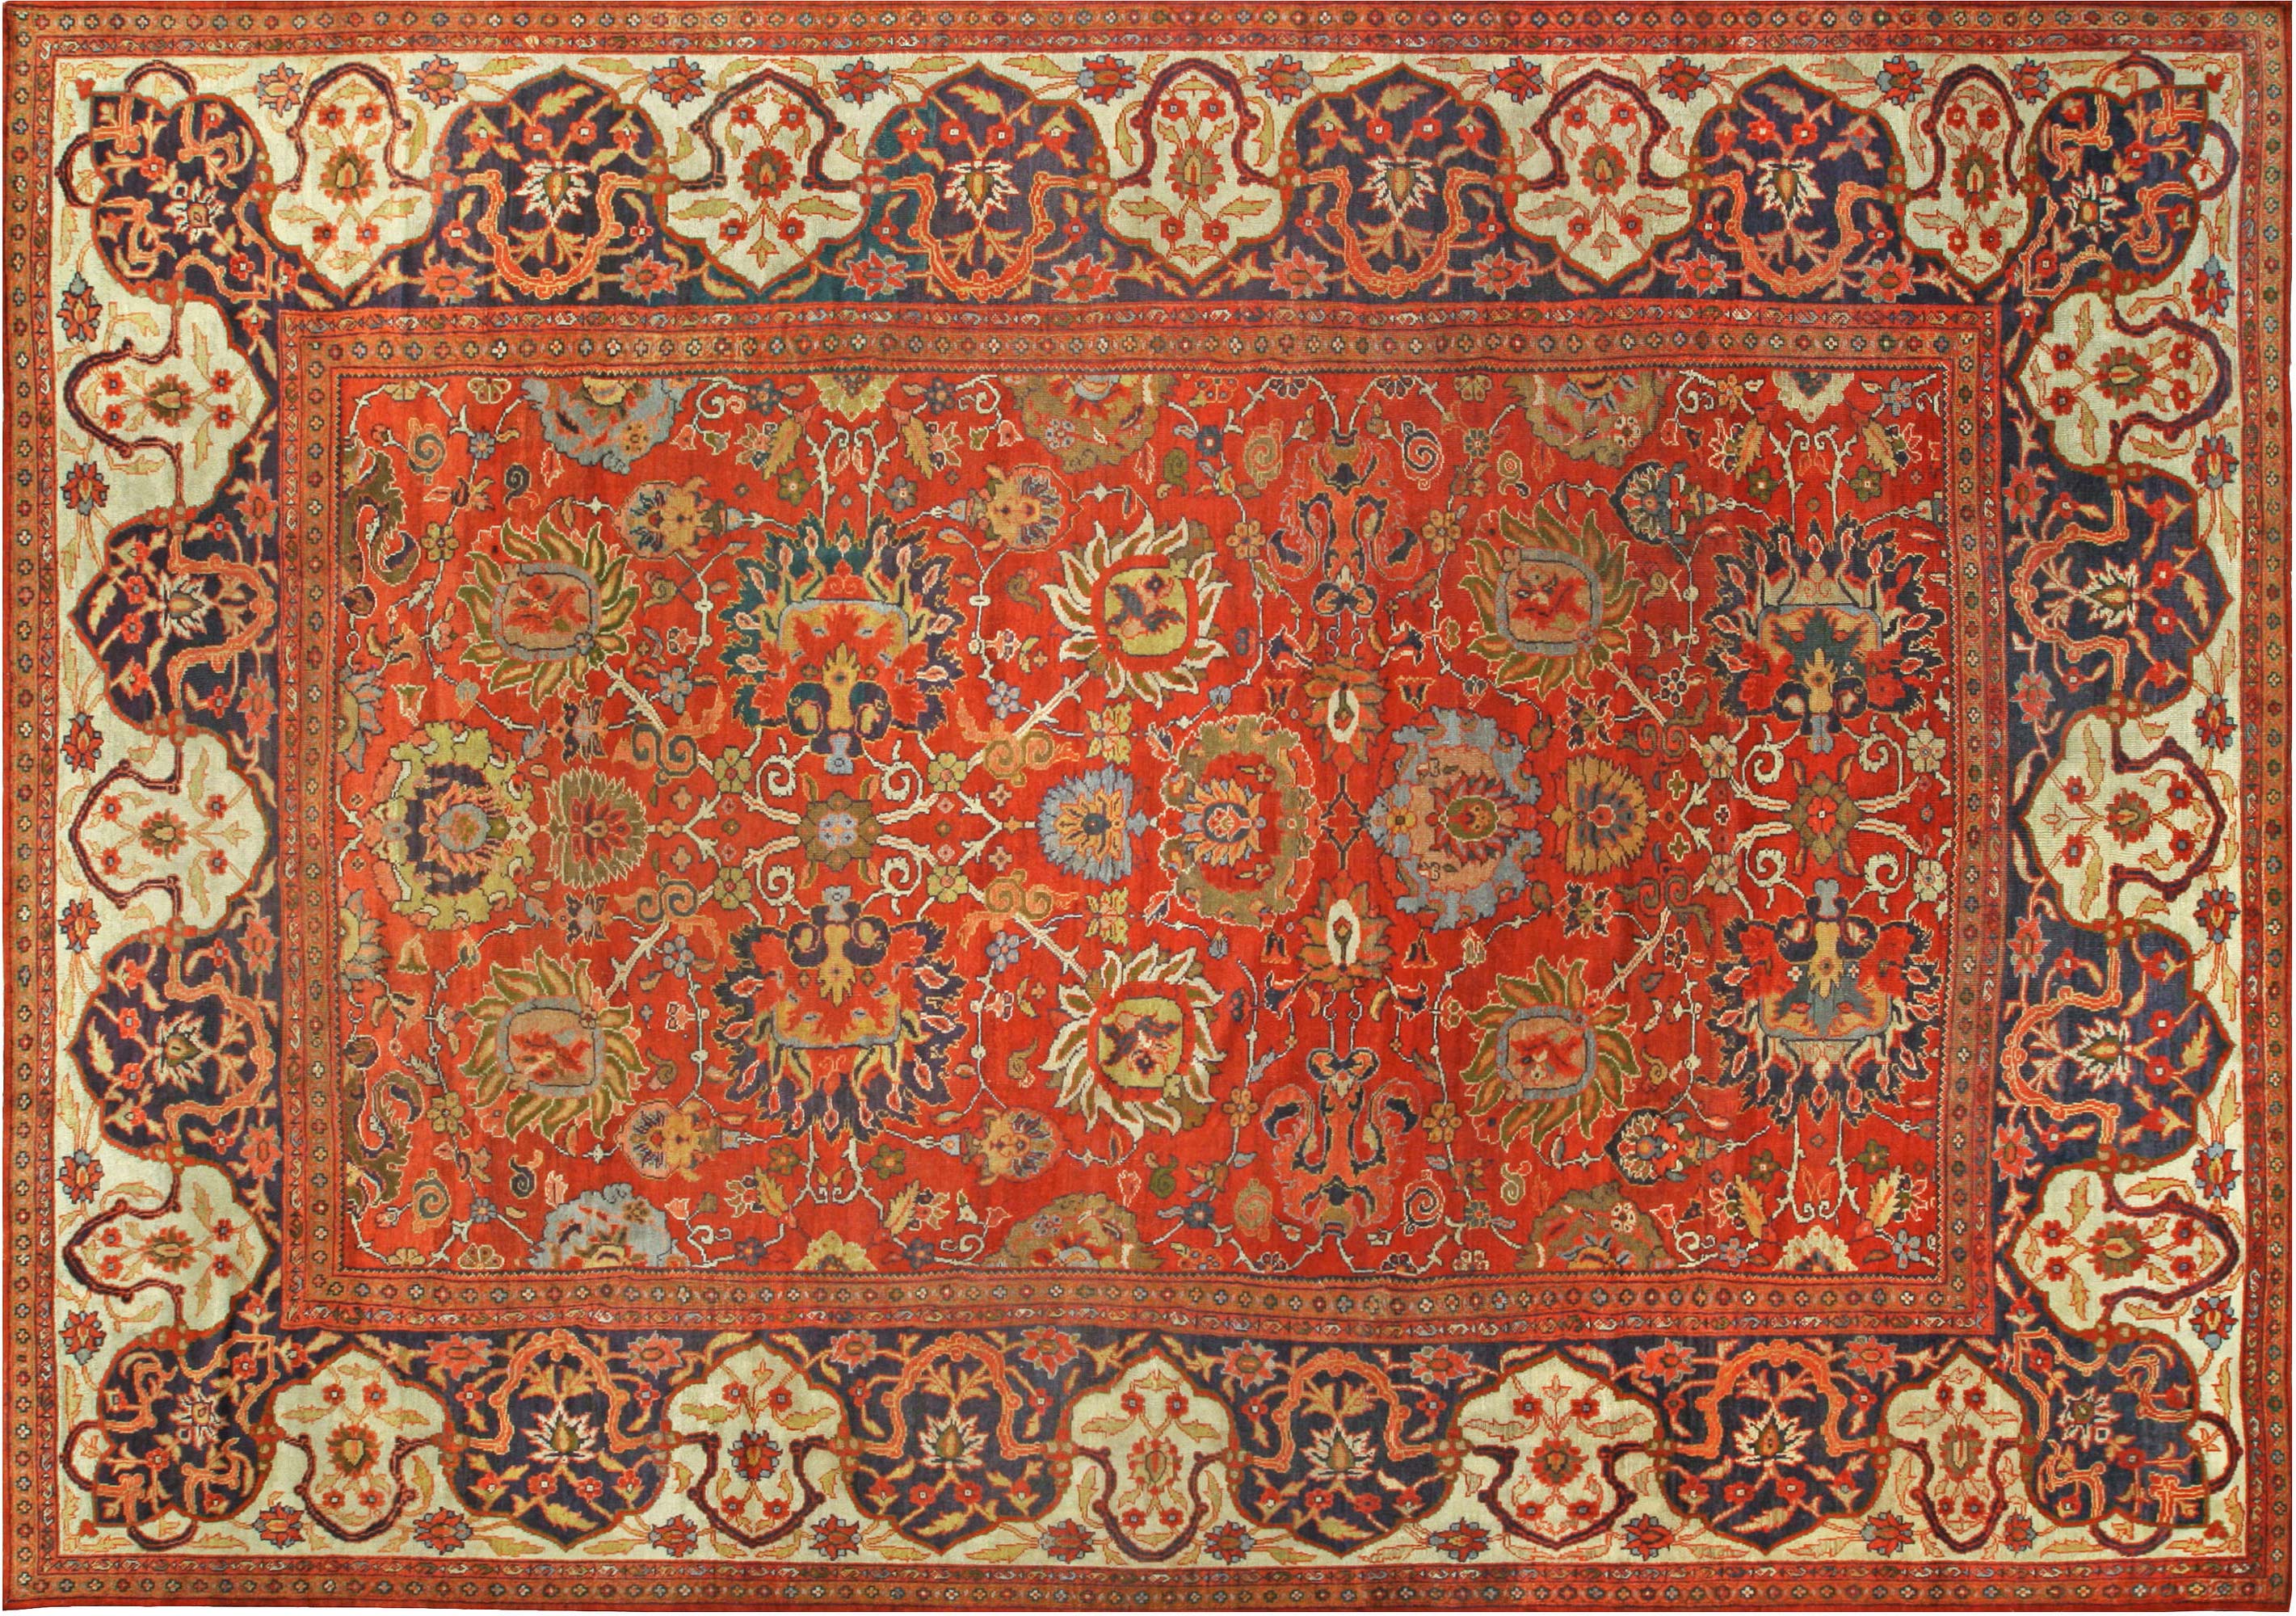 19th Century Persian Sultanabad Red Botanical Handmade Carpet BB6711 by DLB